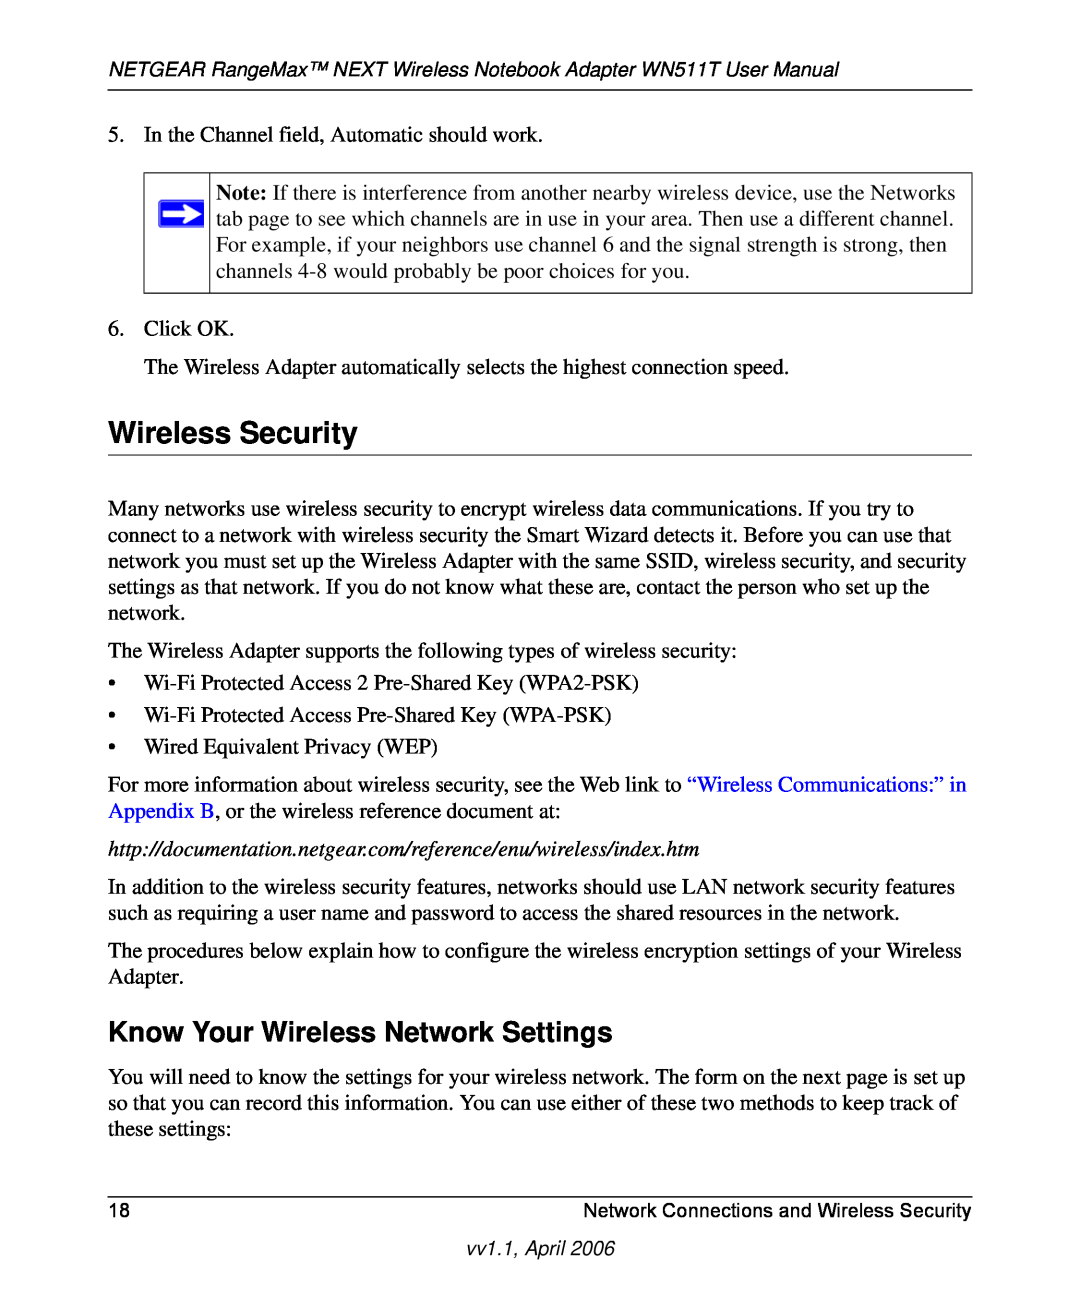 NETGEAR WN511T user manual Wireless Security, Know Your Wireless Network Settings 